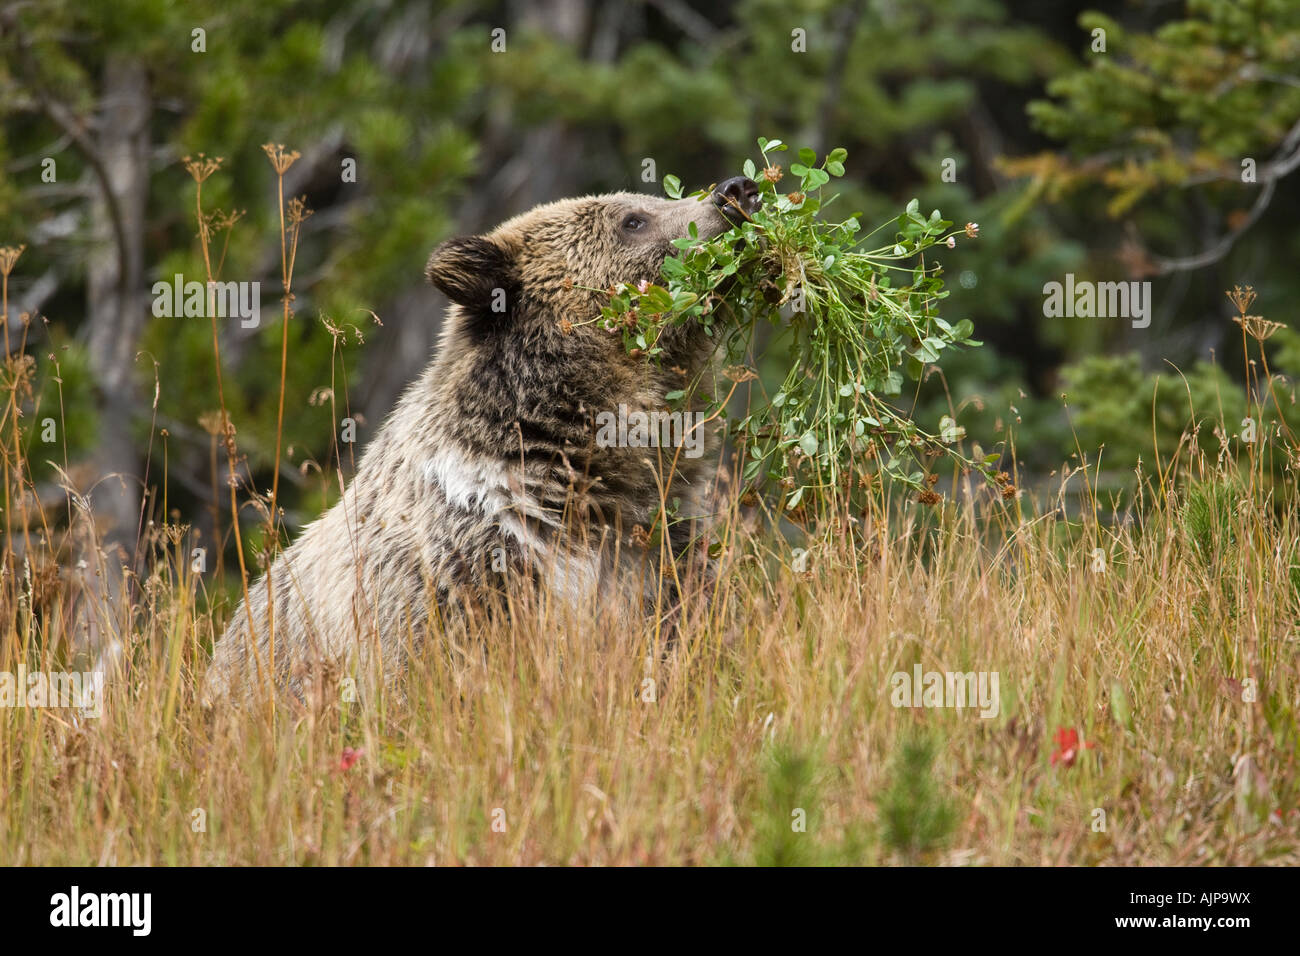 Grizzly bear feeding on clover in Yellowstone Stock Photo